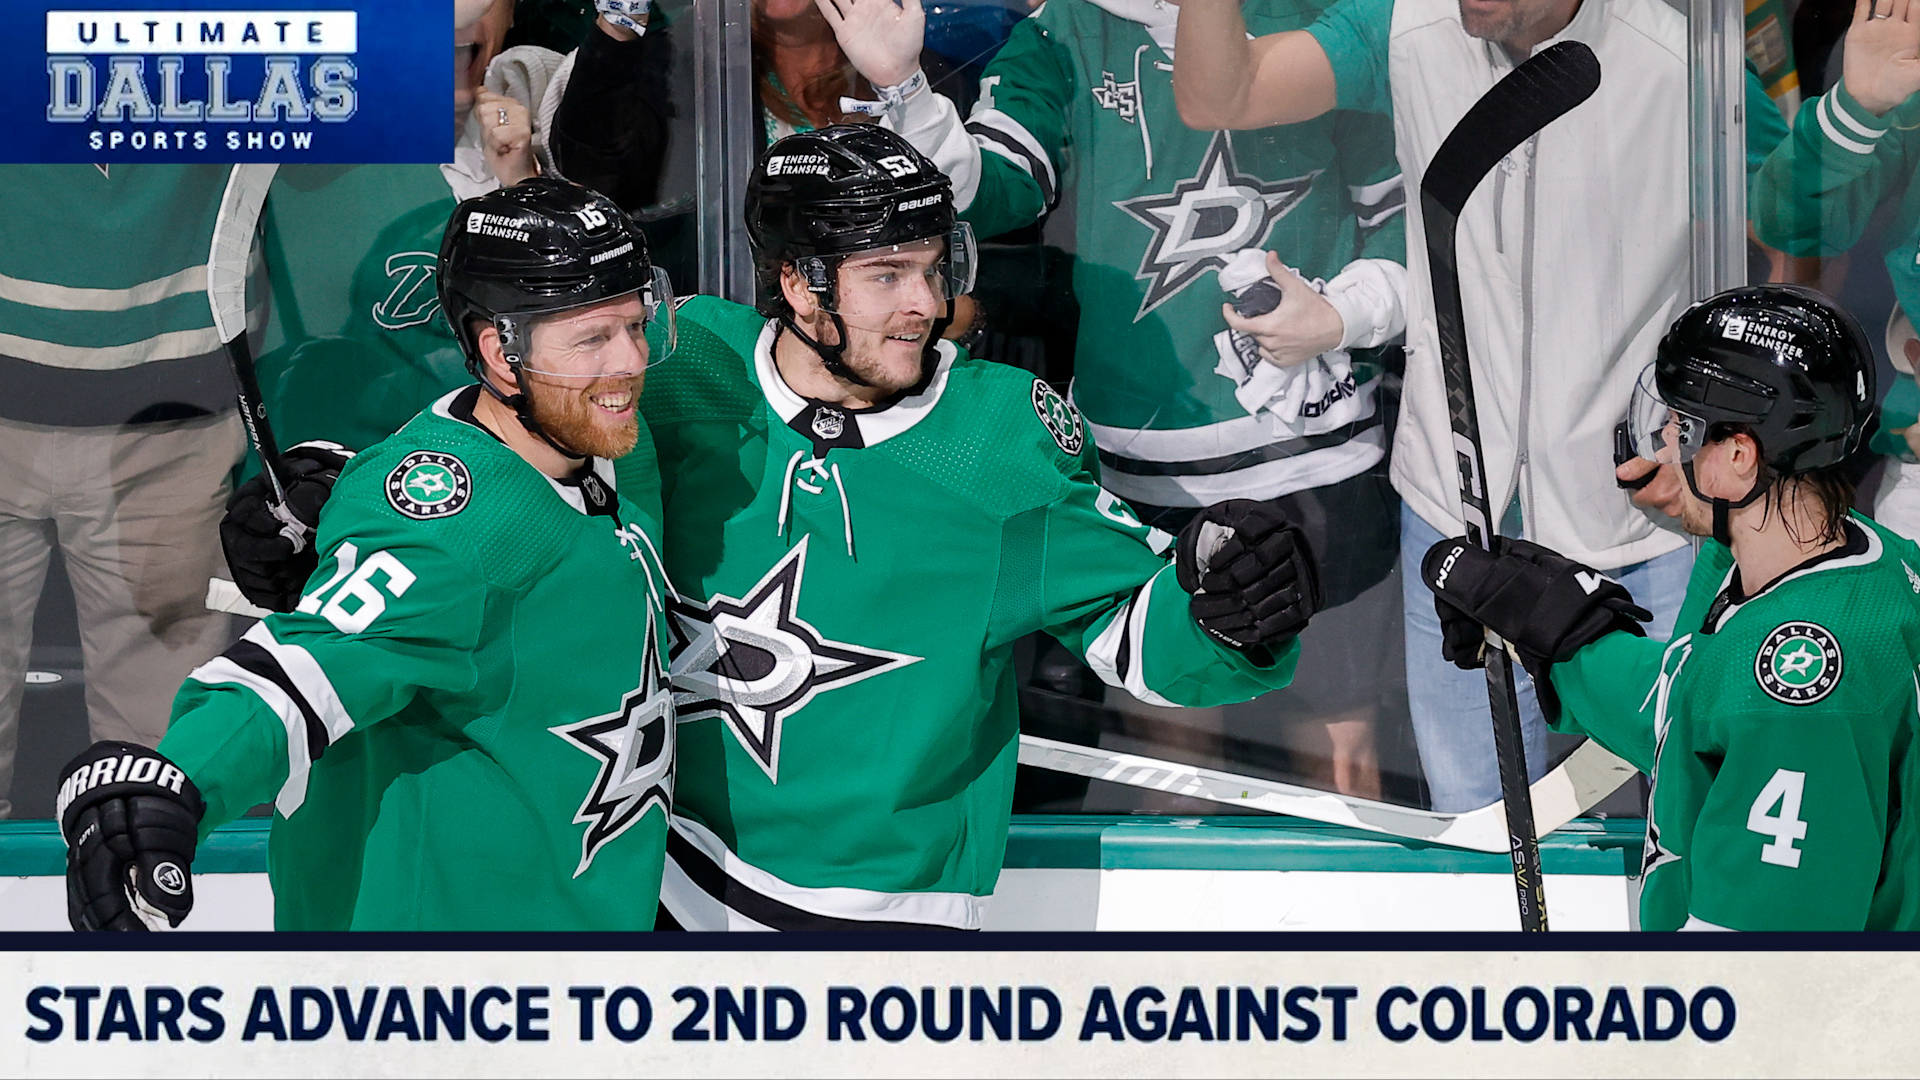 The Stars defeat the defending Stanley Cup Champions in Game 7! The Ultimate Dallas Sports Show breaks down why Dallas is moving on.